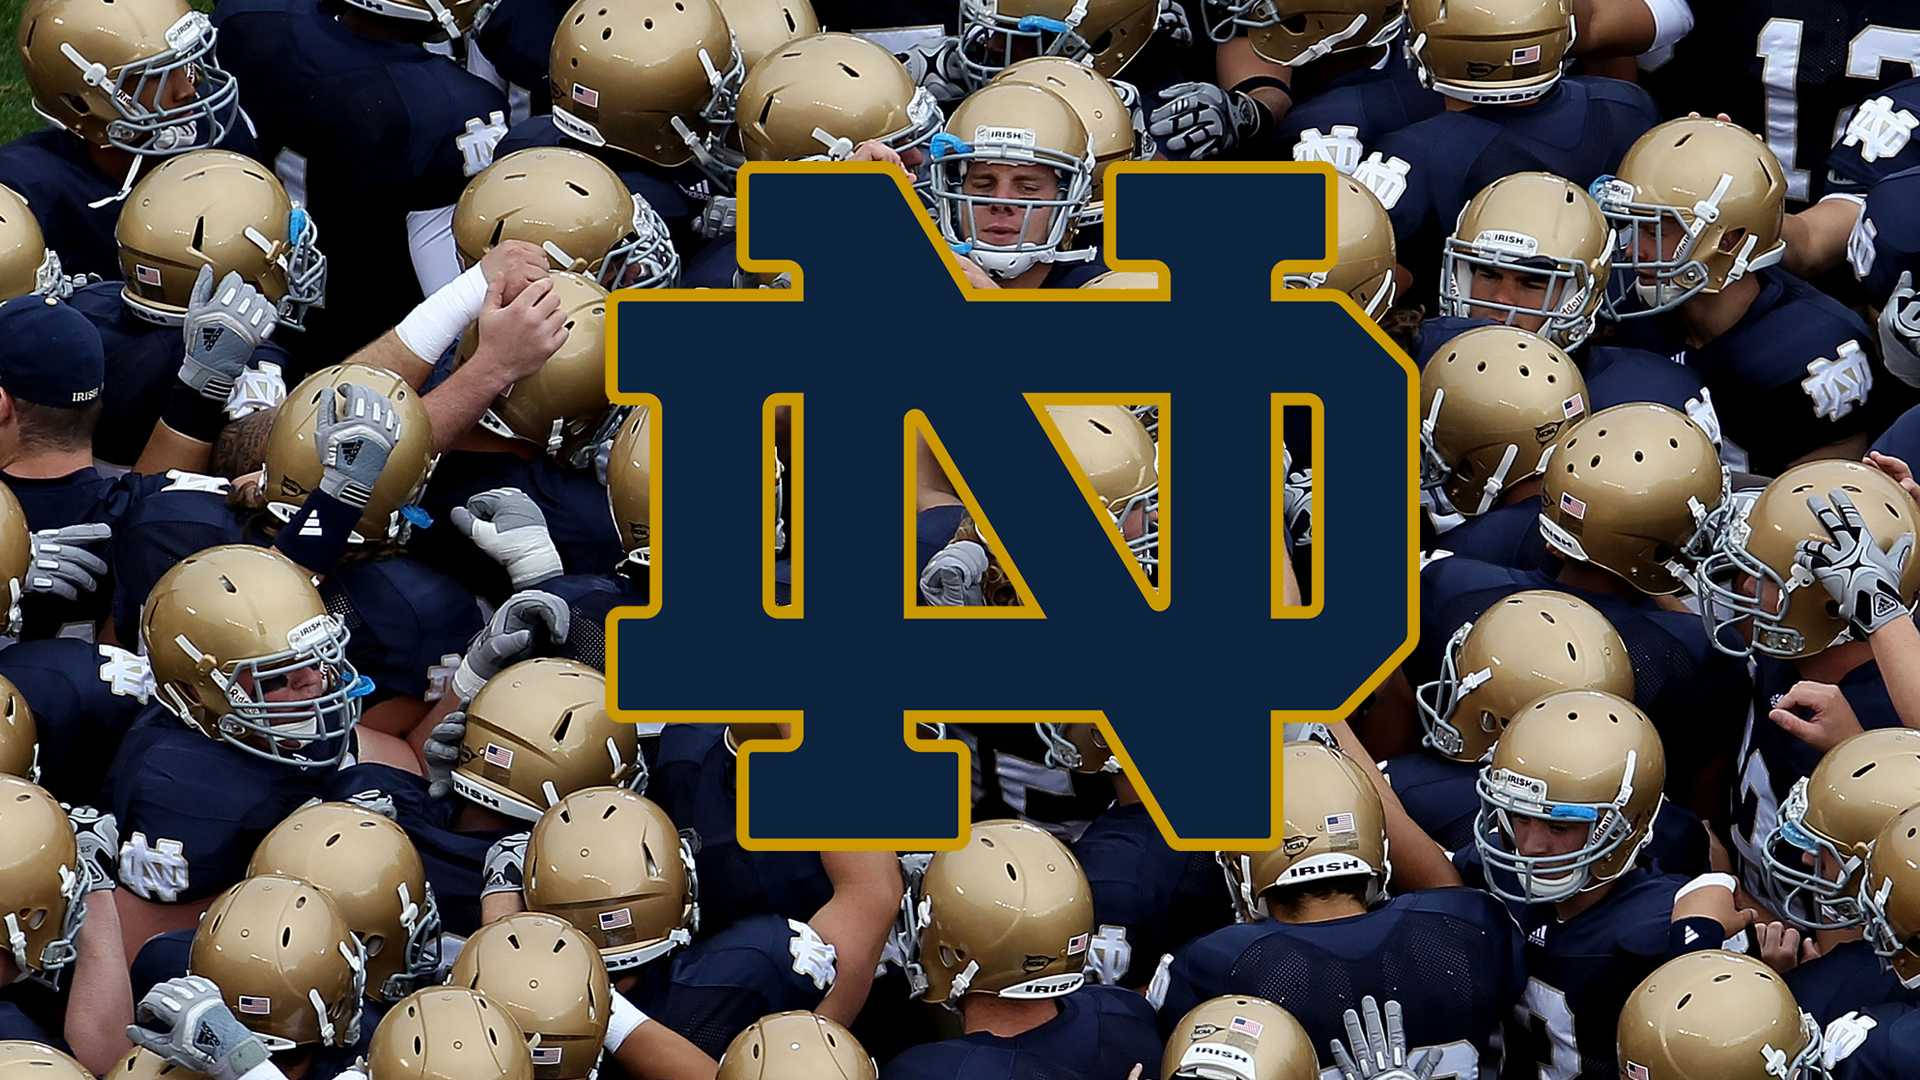 100+] Notre Dame Football Wallpapers